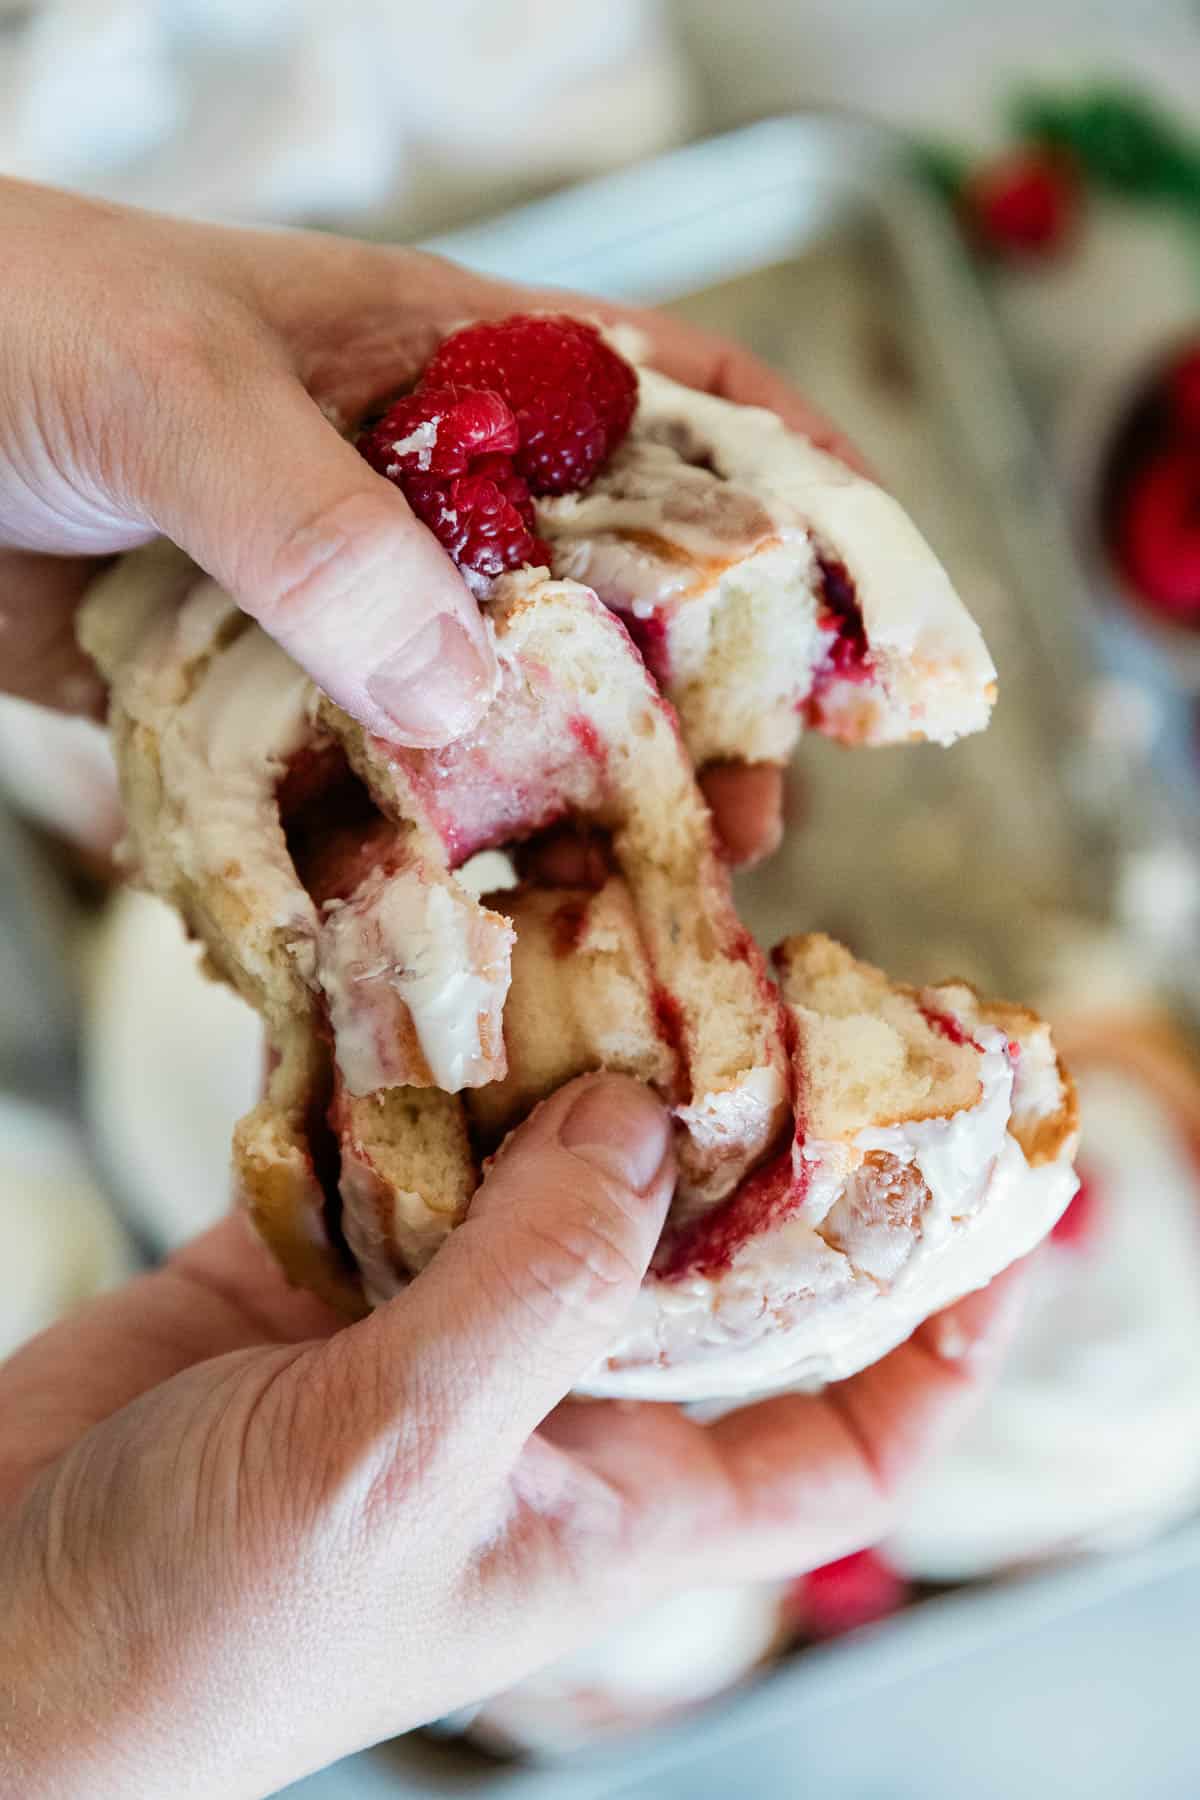 A raspberry roll being pulled apart.